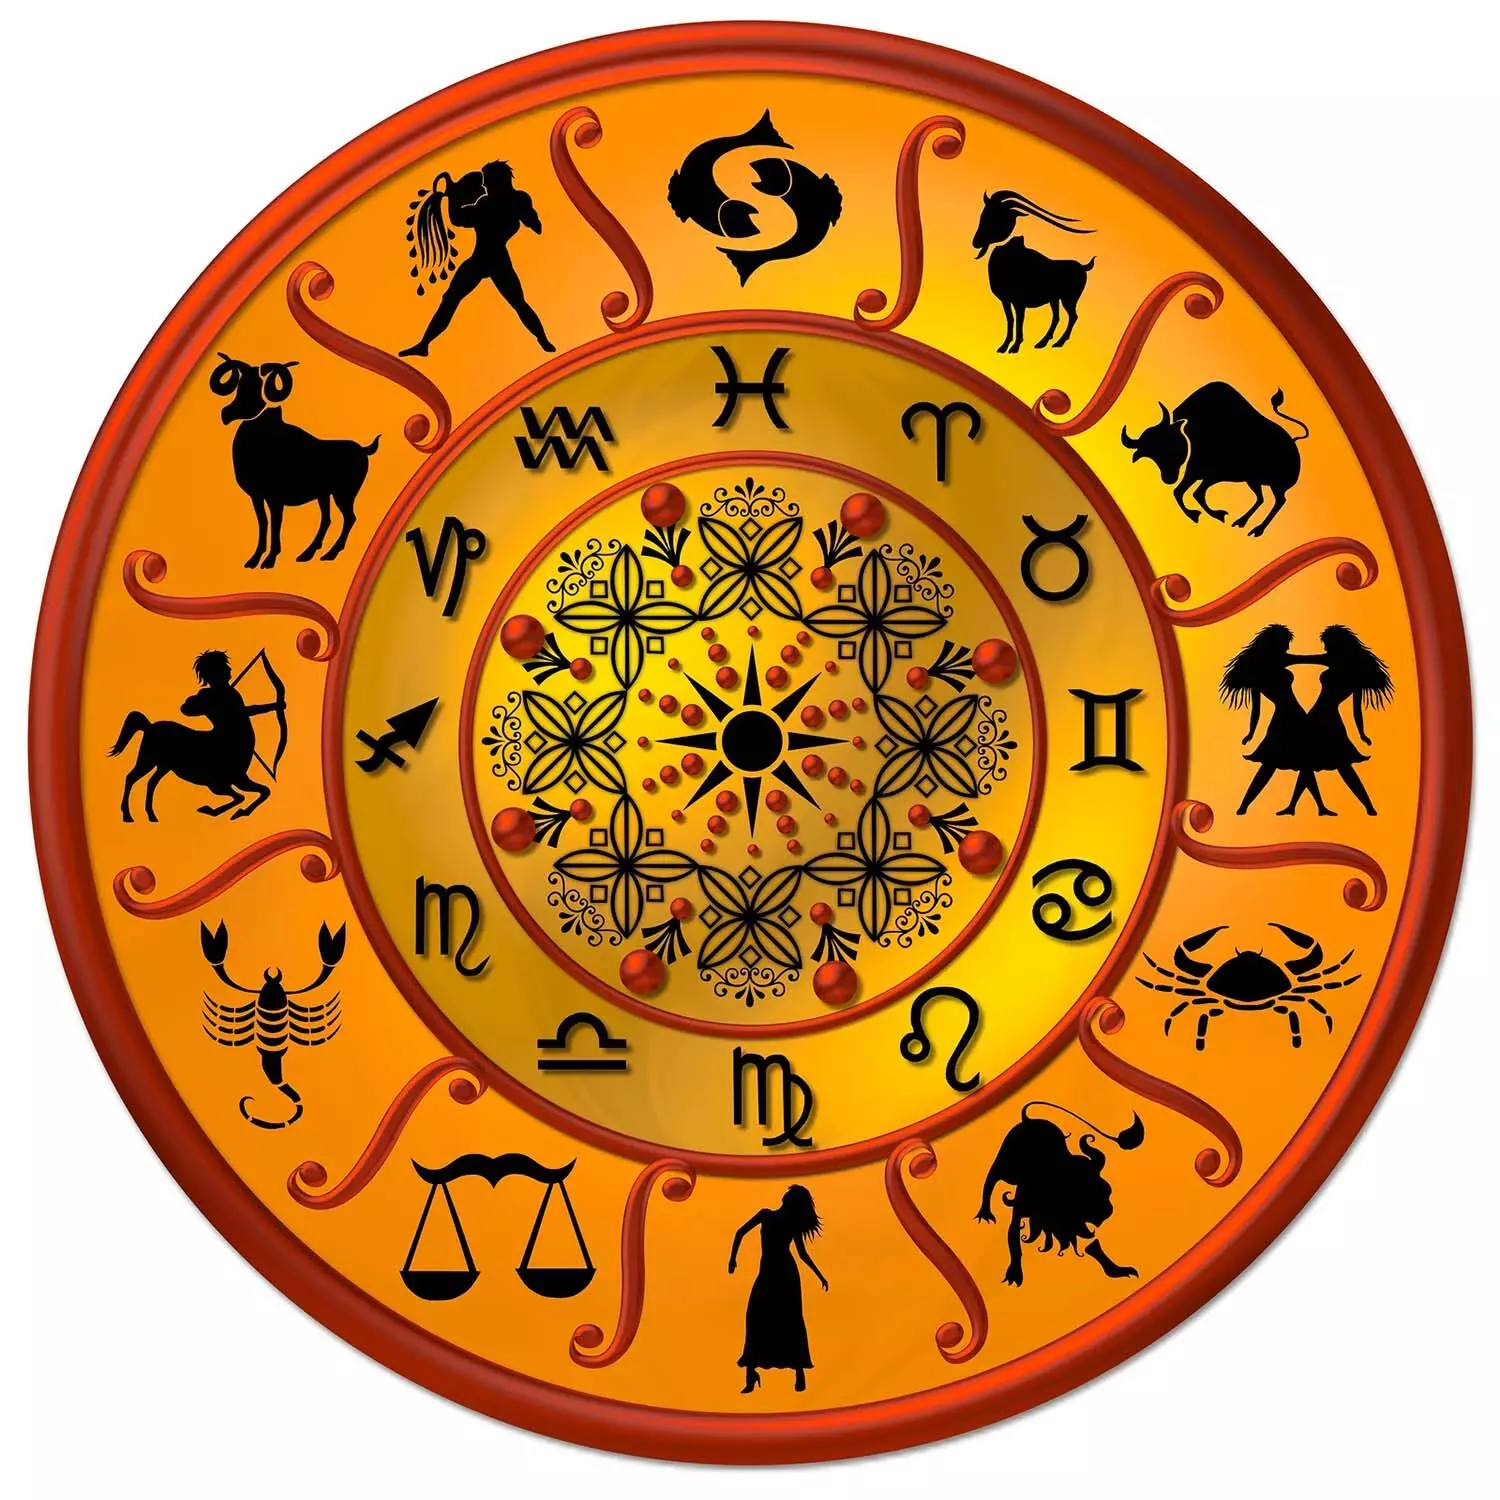 23 July – Know your todays horoscope